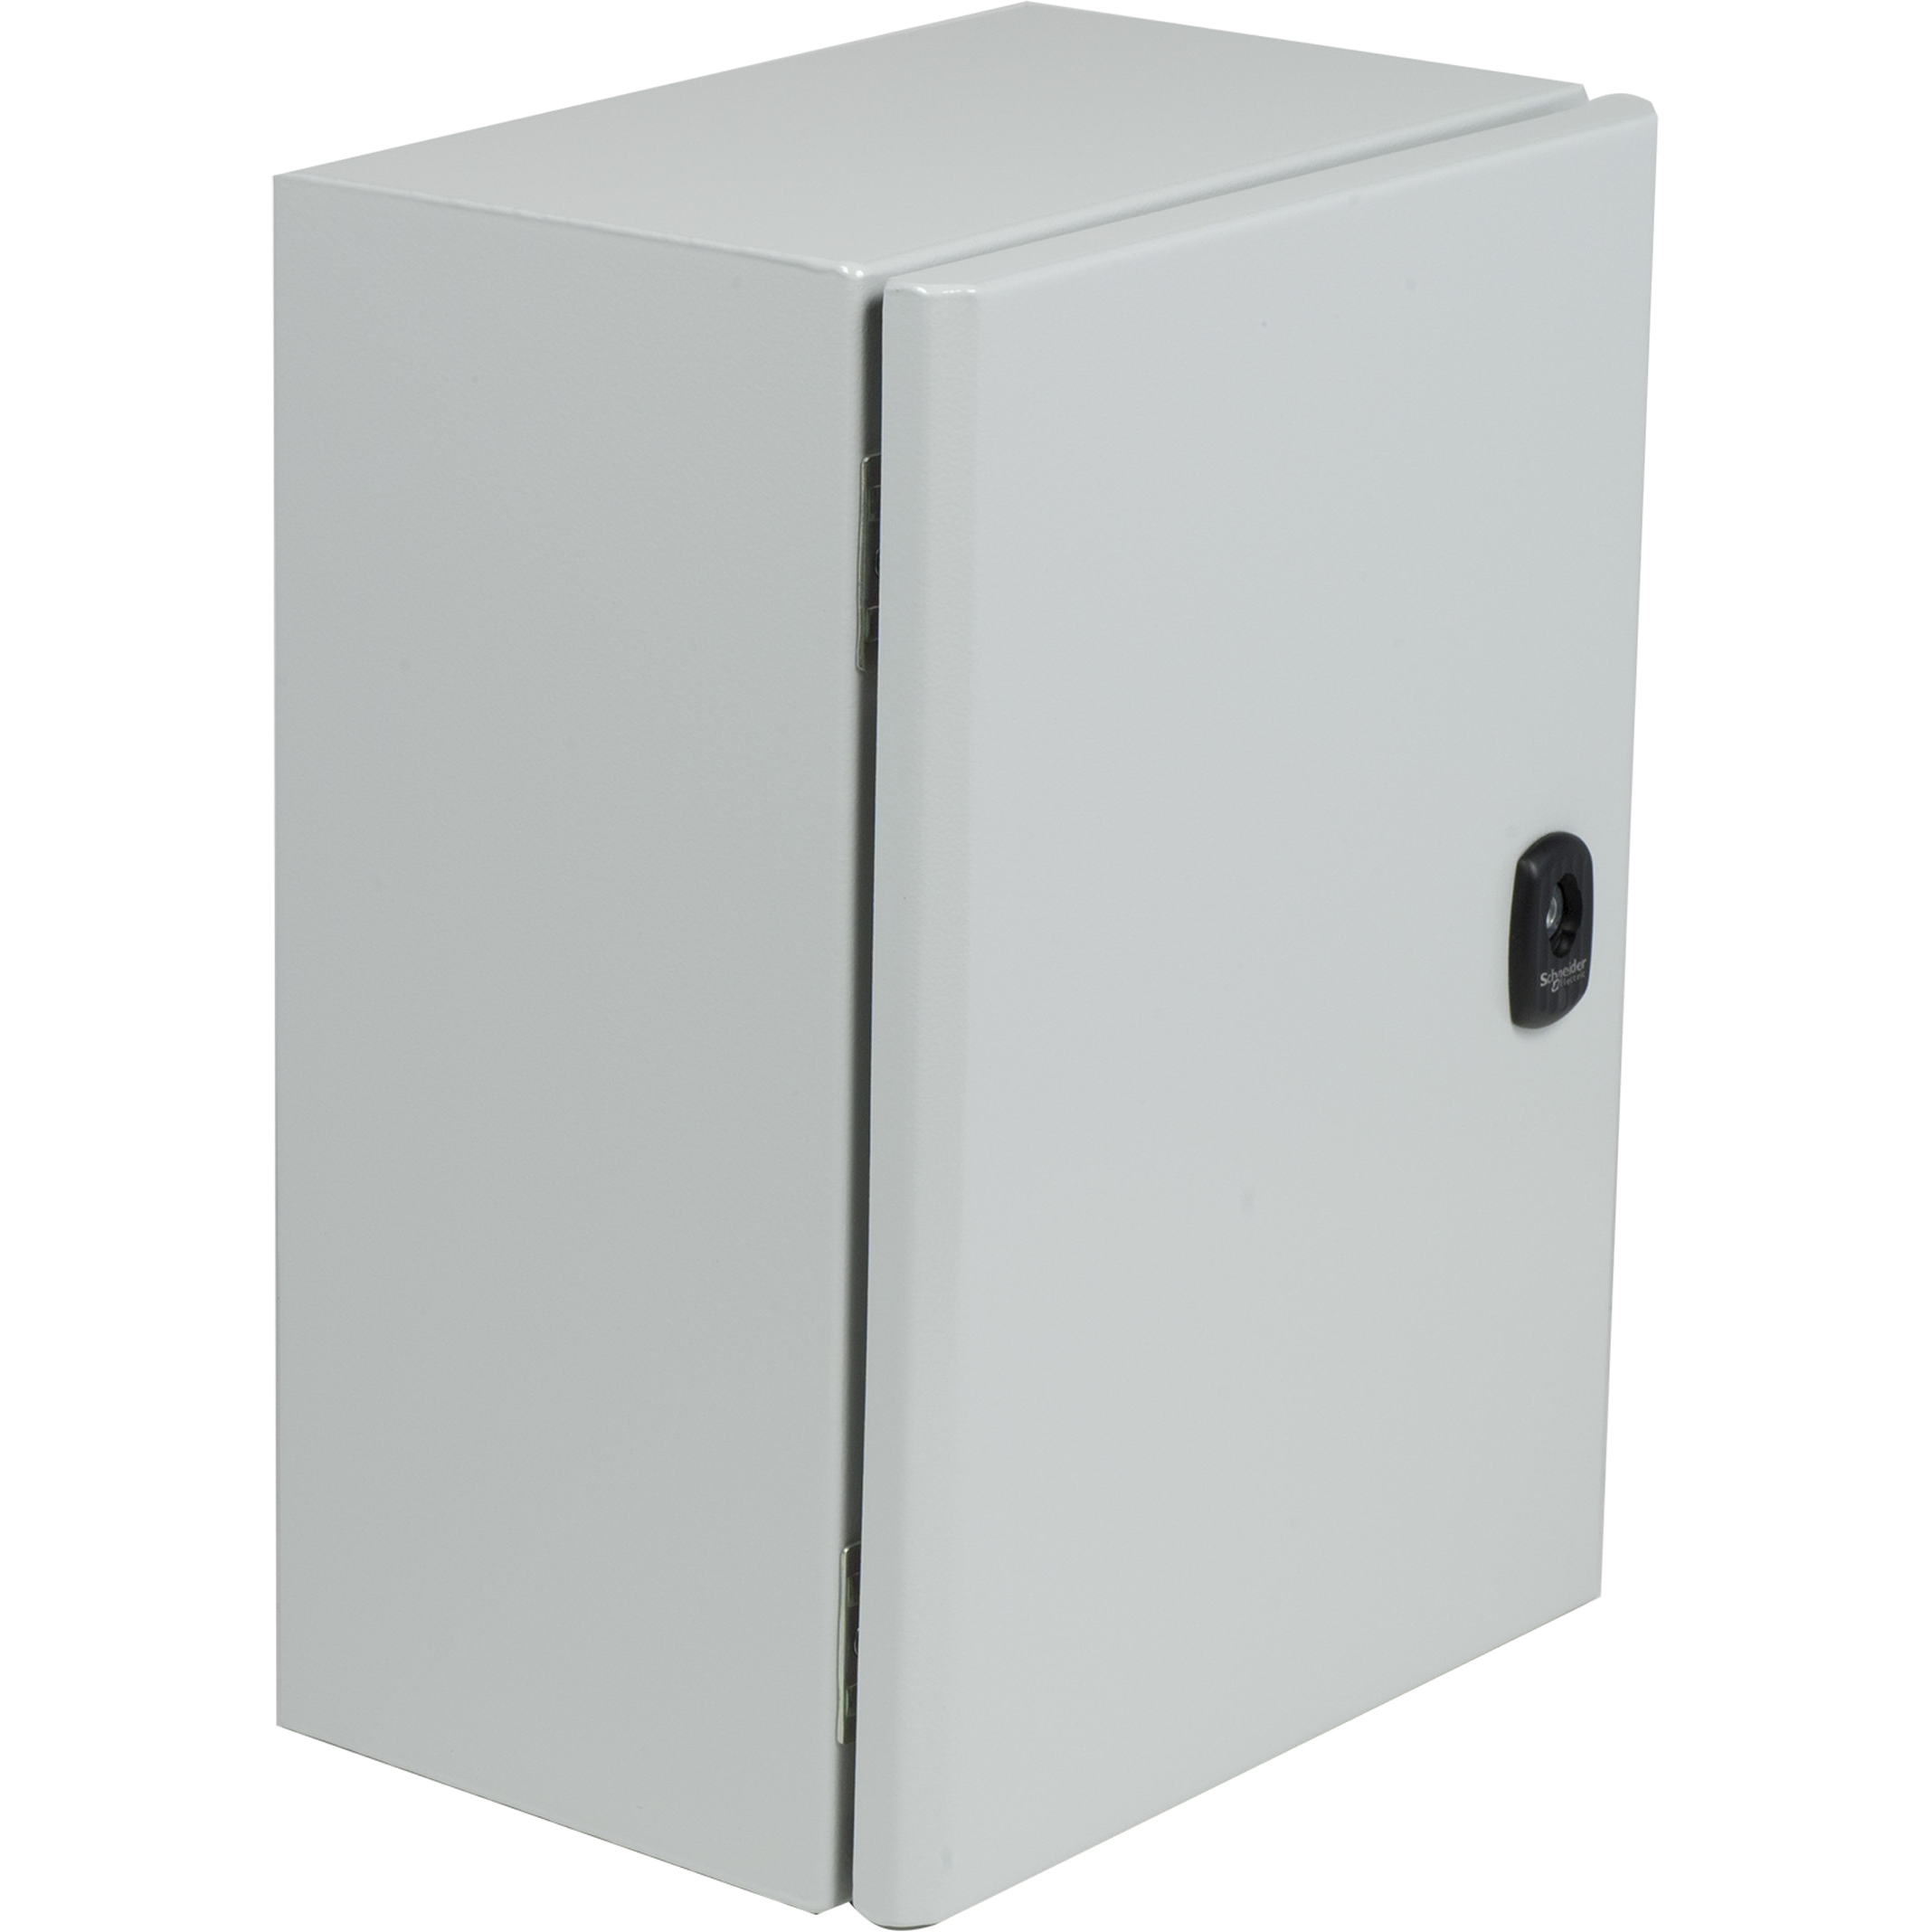 Wall mounted steel enclosure, Spacial S3DC, plain door, without plain chasis, 400x400x200mm, IP66, IK10